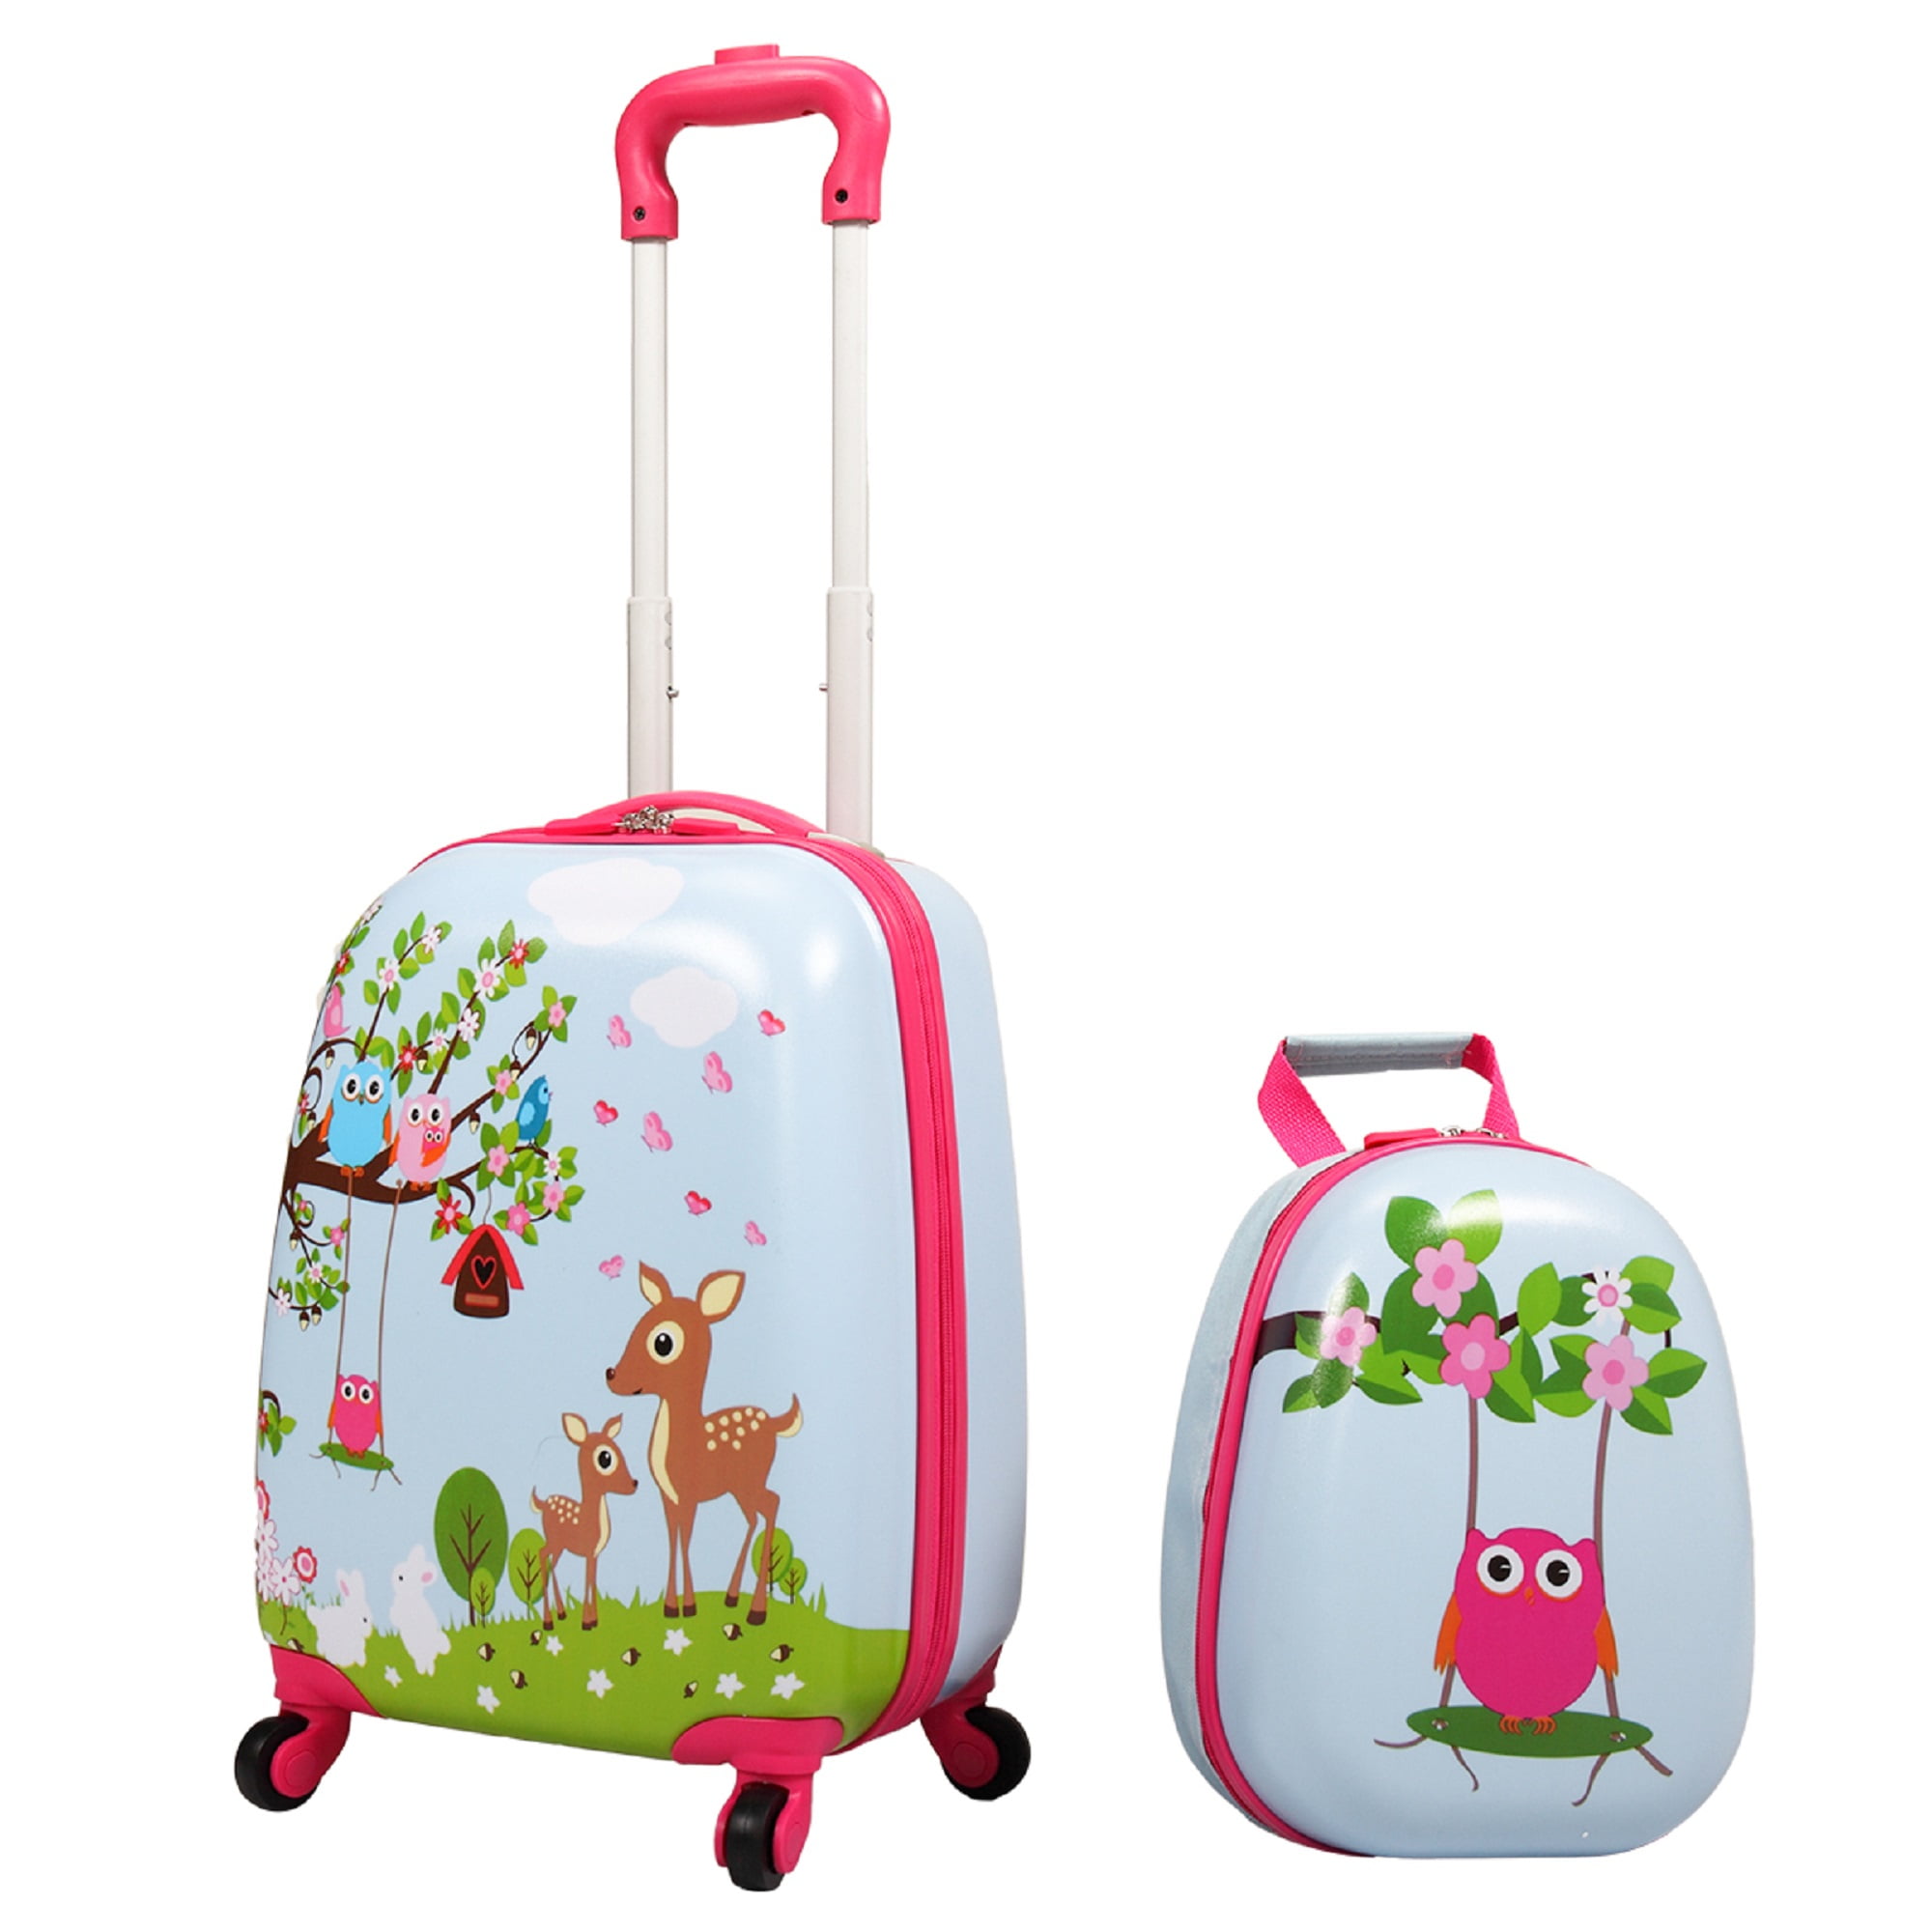 12 & 18 Kids Carry On Luggage Set with 4 Multi-Directional Wheels HONEY JOY 2Pc Kids Luggage Rolling Trolley Suitcase for Boys and Girls Travel 